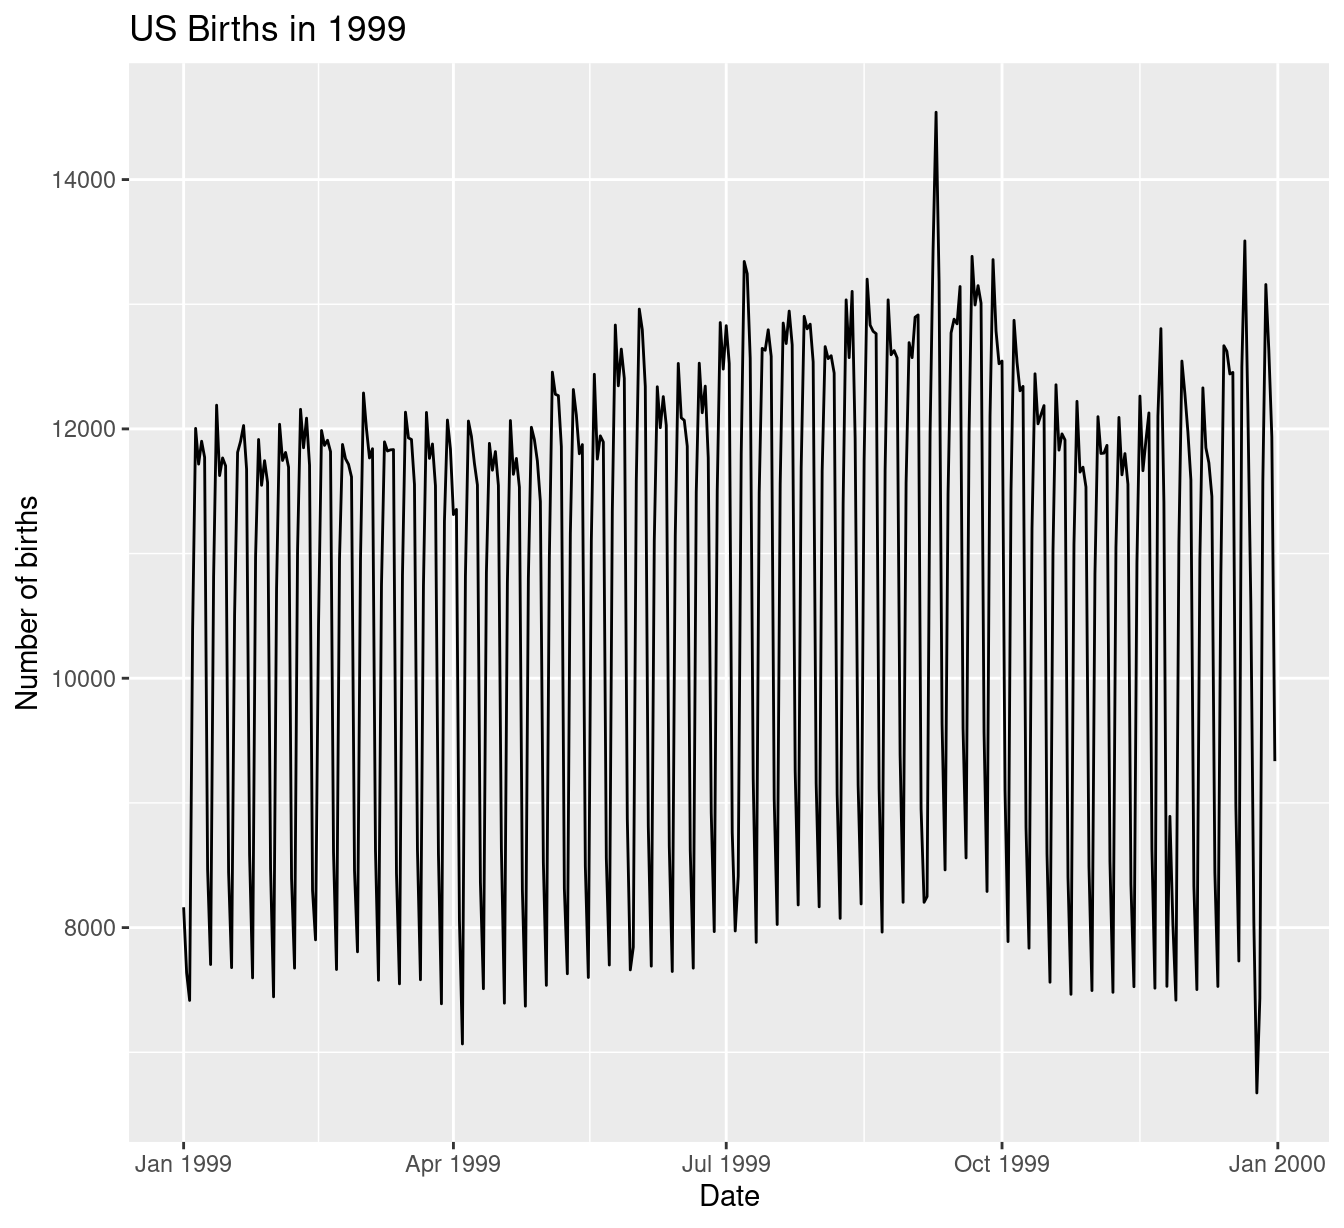 Number of births in the US in 1999.